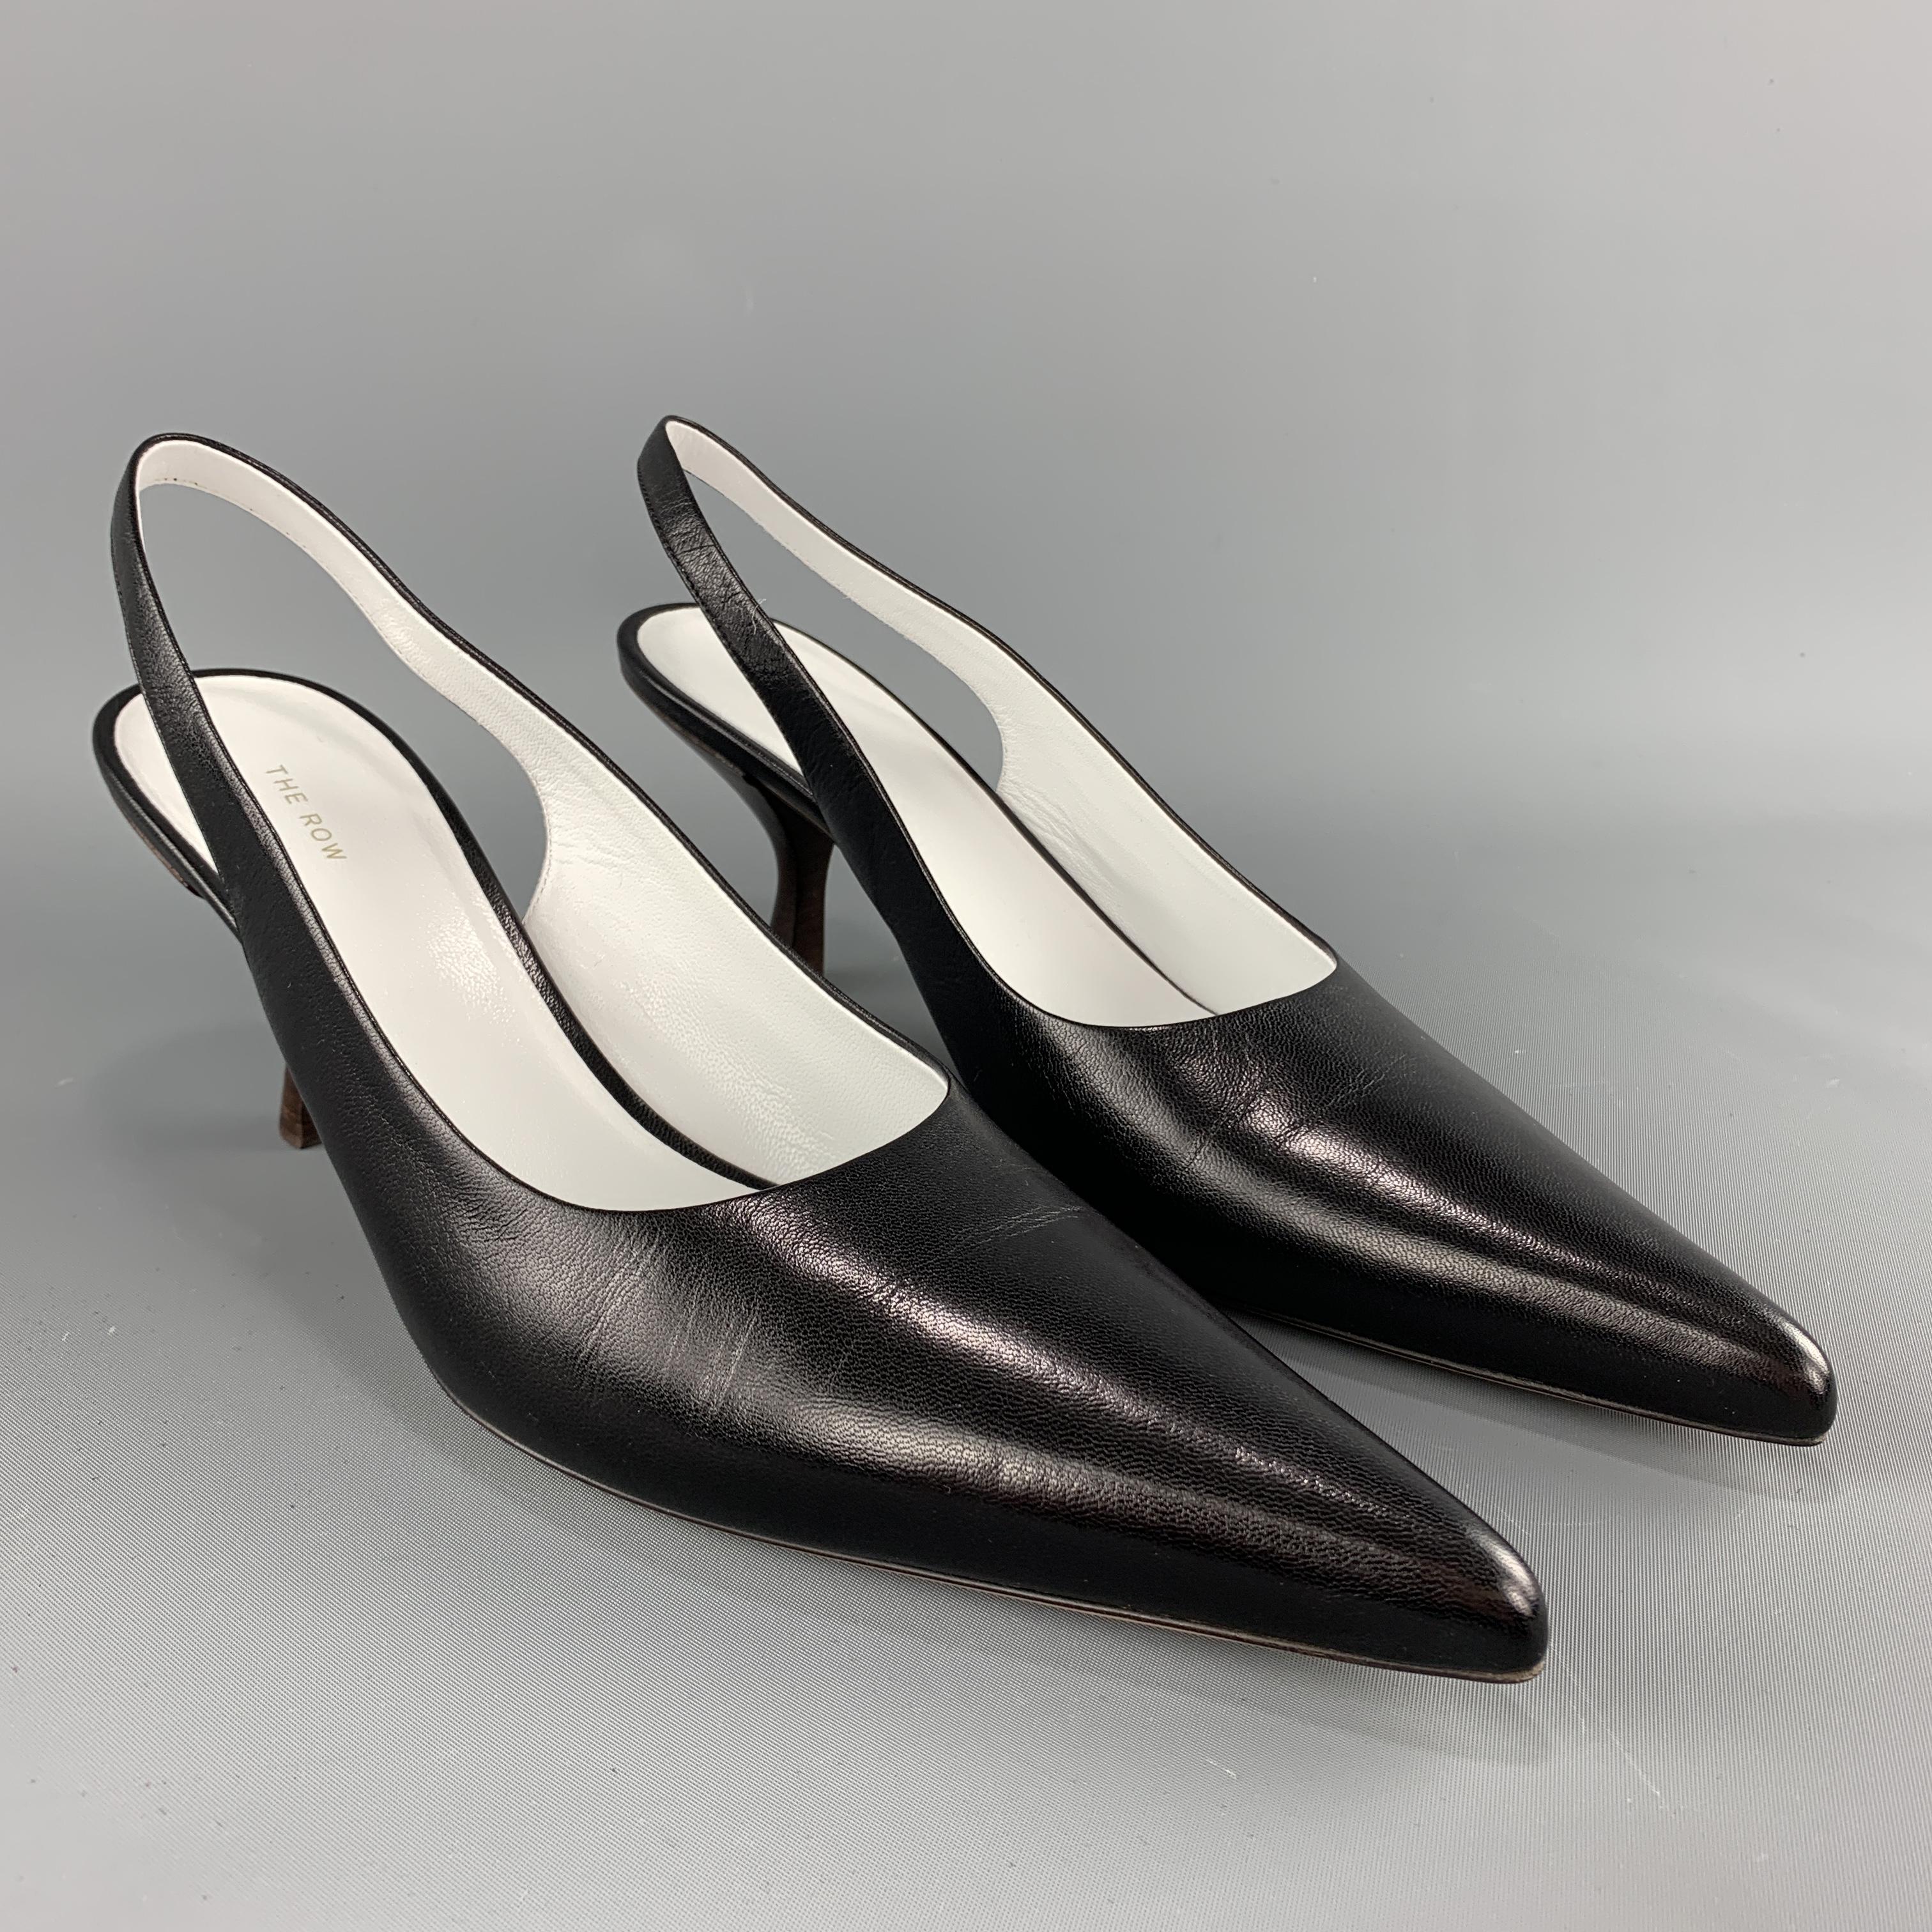 THE ROW Bourgeoise Sling pumps come in black leather with a pointed toe, sling back, and brown stacked kitten heel. Made in Italy. 

New with Box. Pre-Owned Condition.
Marked: IT 39.5

Heel: 3.5 in.